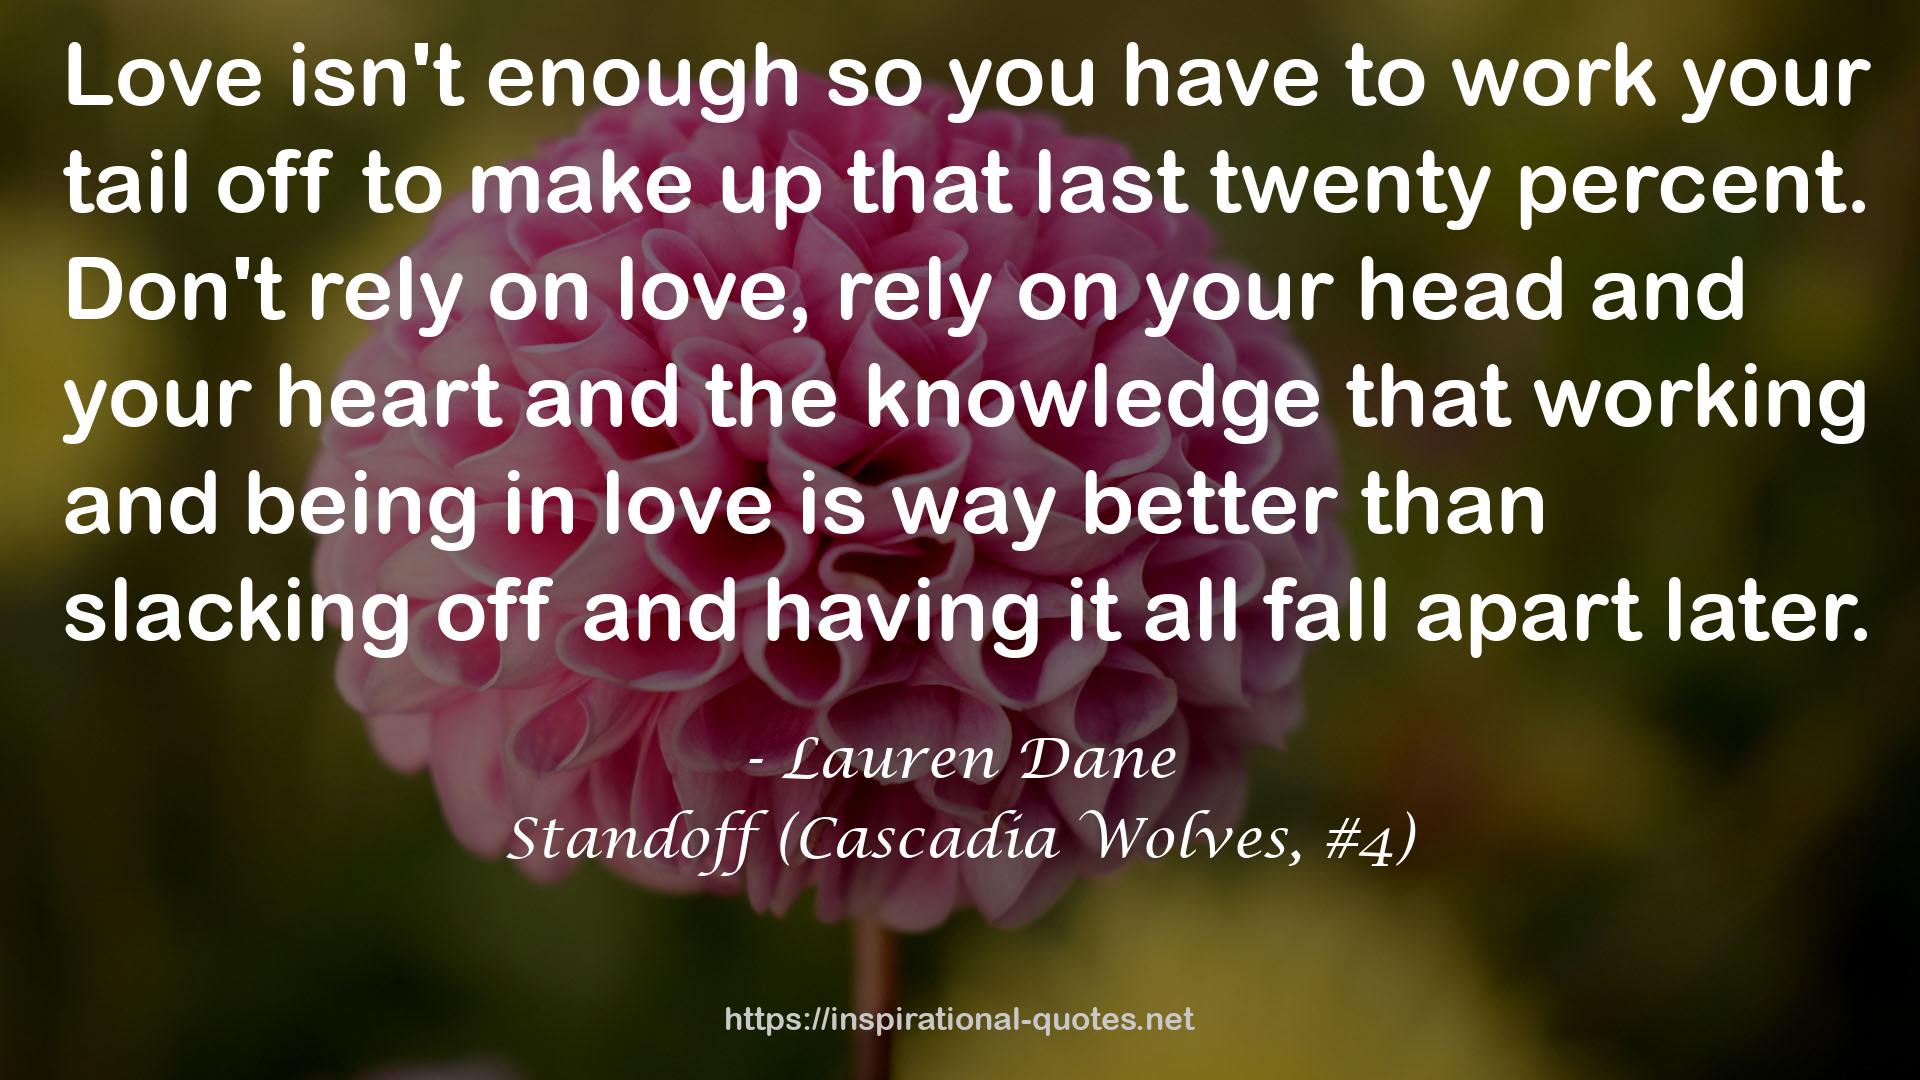 Standoff (Cascadia Wolves, #4) QUOTES